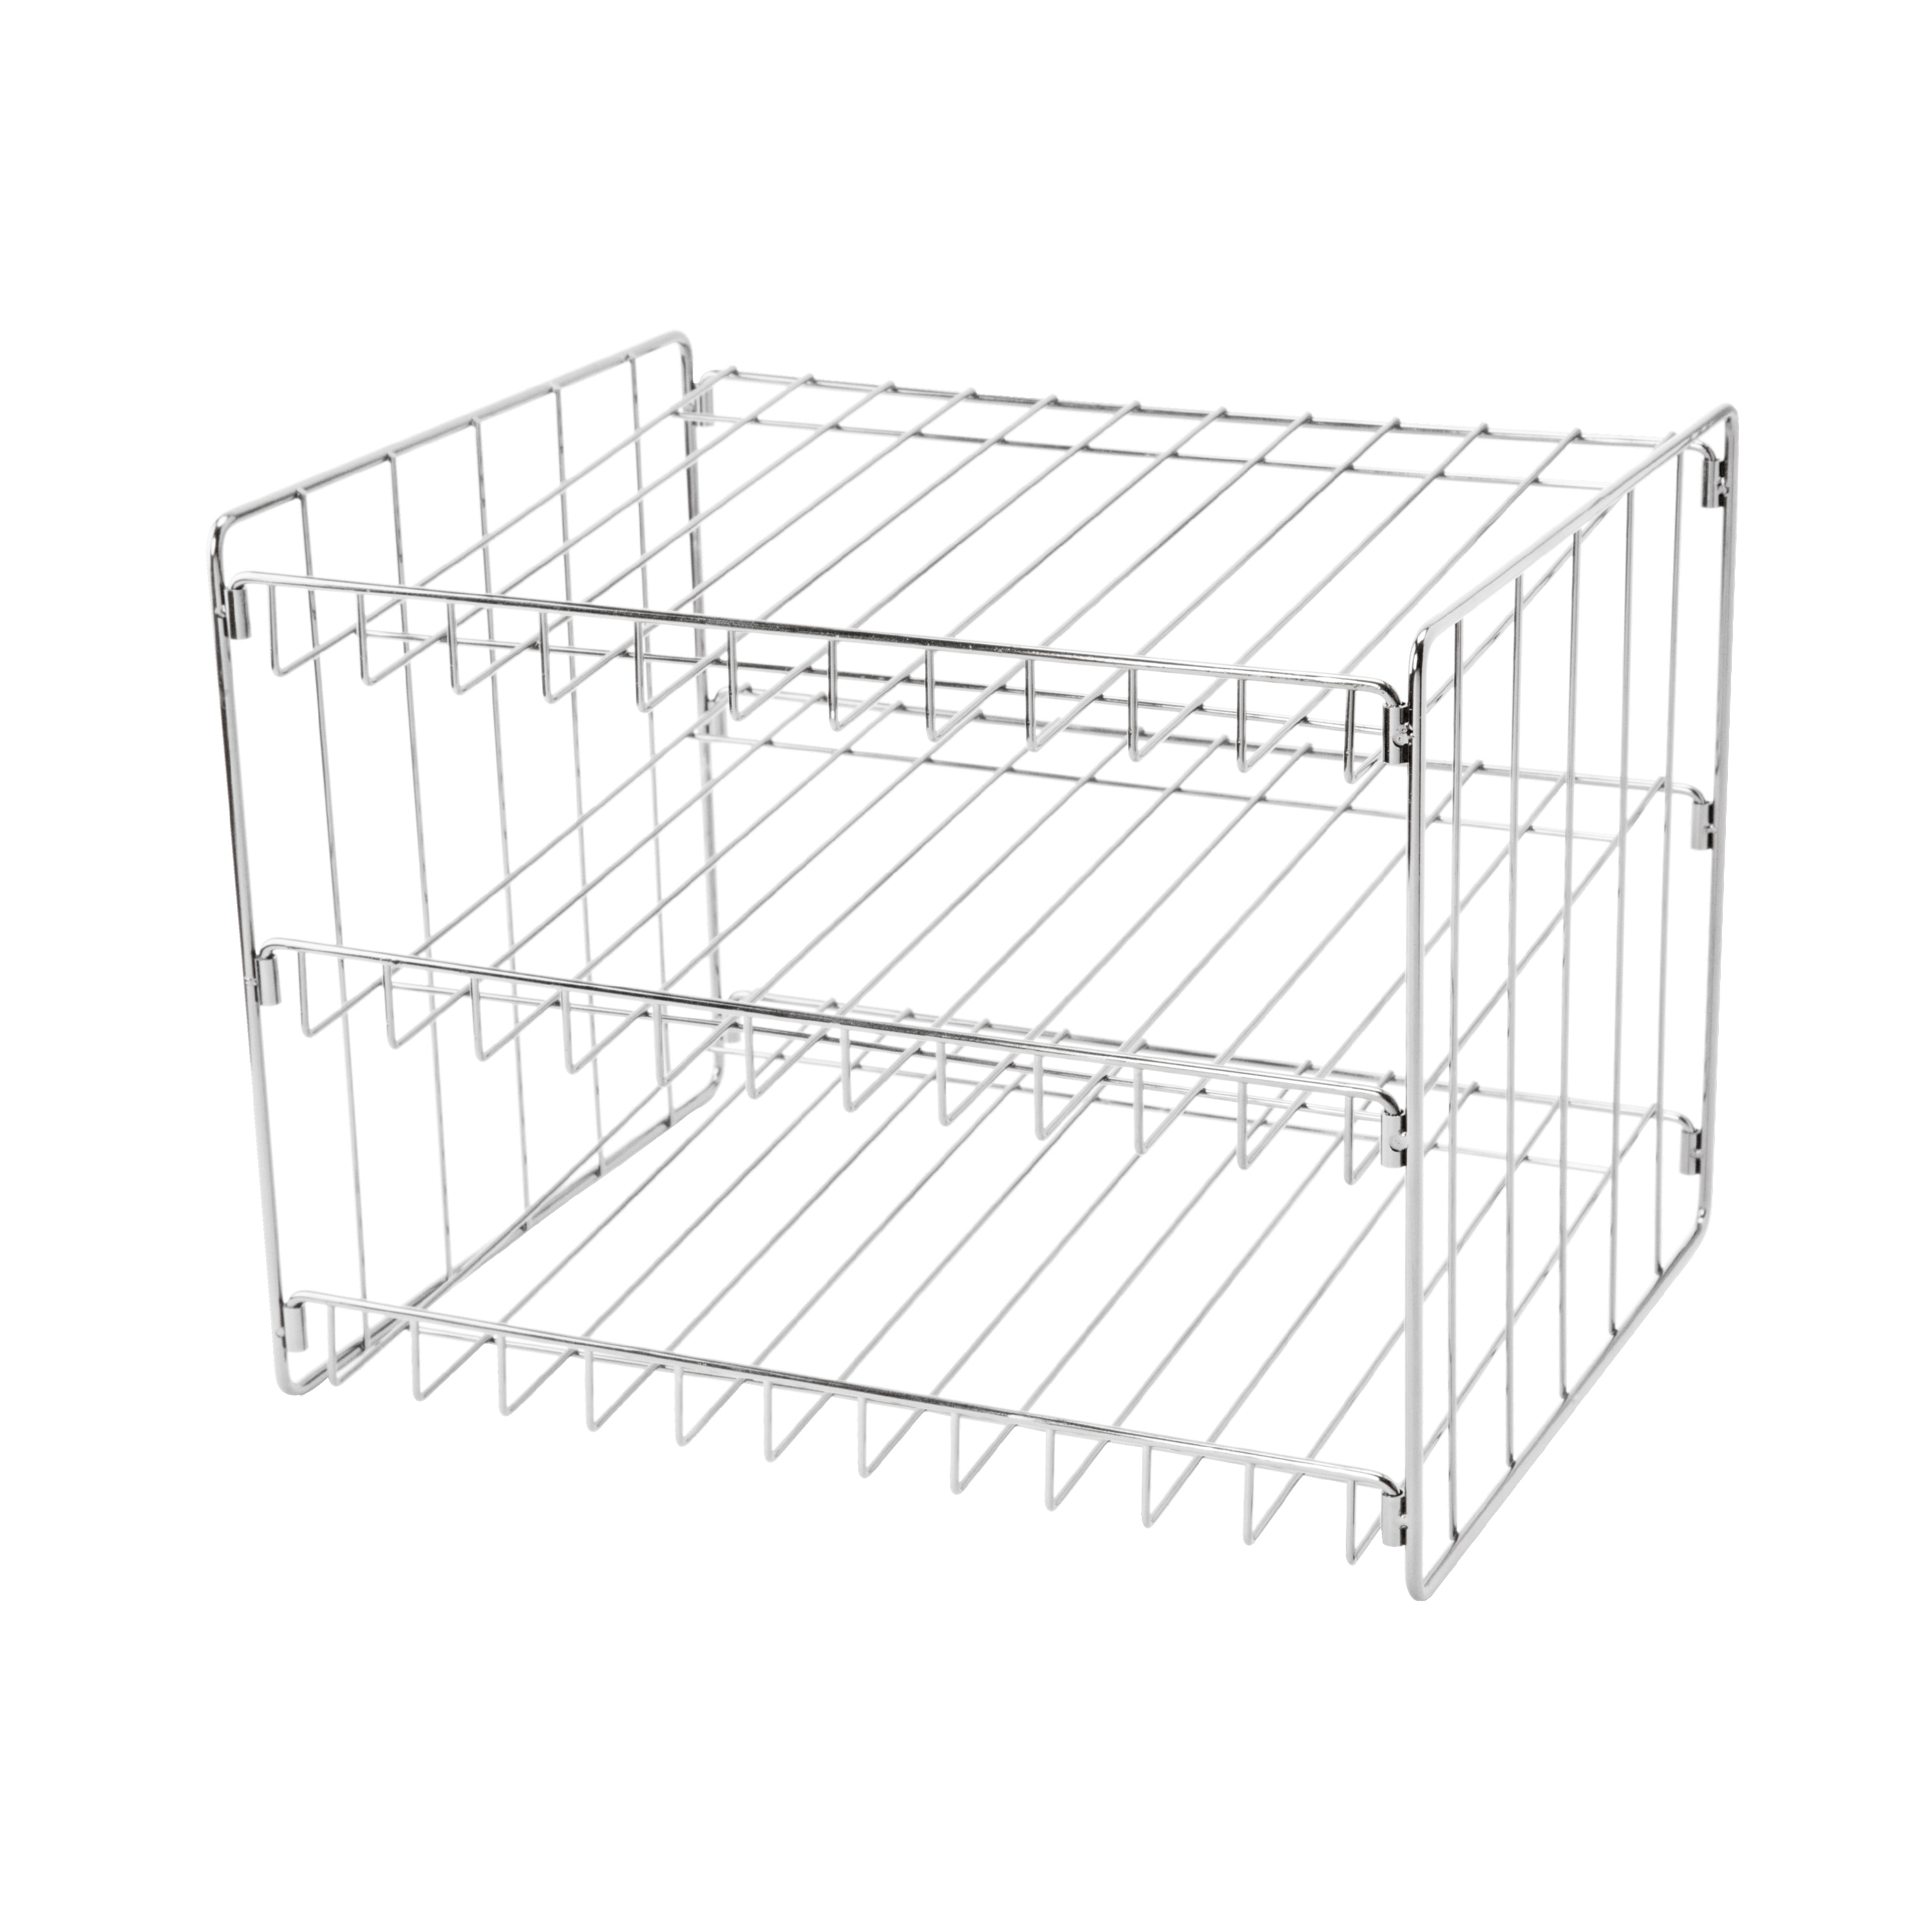 https://ak1.ostkcdn.com/images/products/is/images/direct/2d7d50f6b591ffe6ca1886ab9dba14c1e056fb5e/Kitchen-Details-3-Tier-Can-Storage-Organizer-Rack.jpg